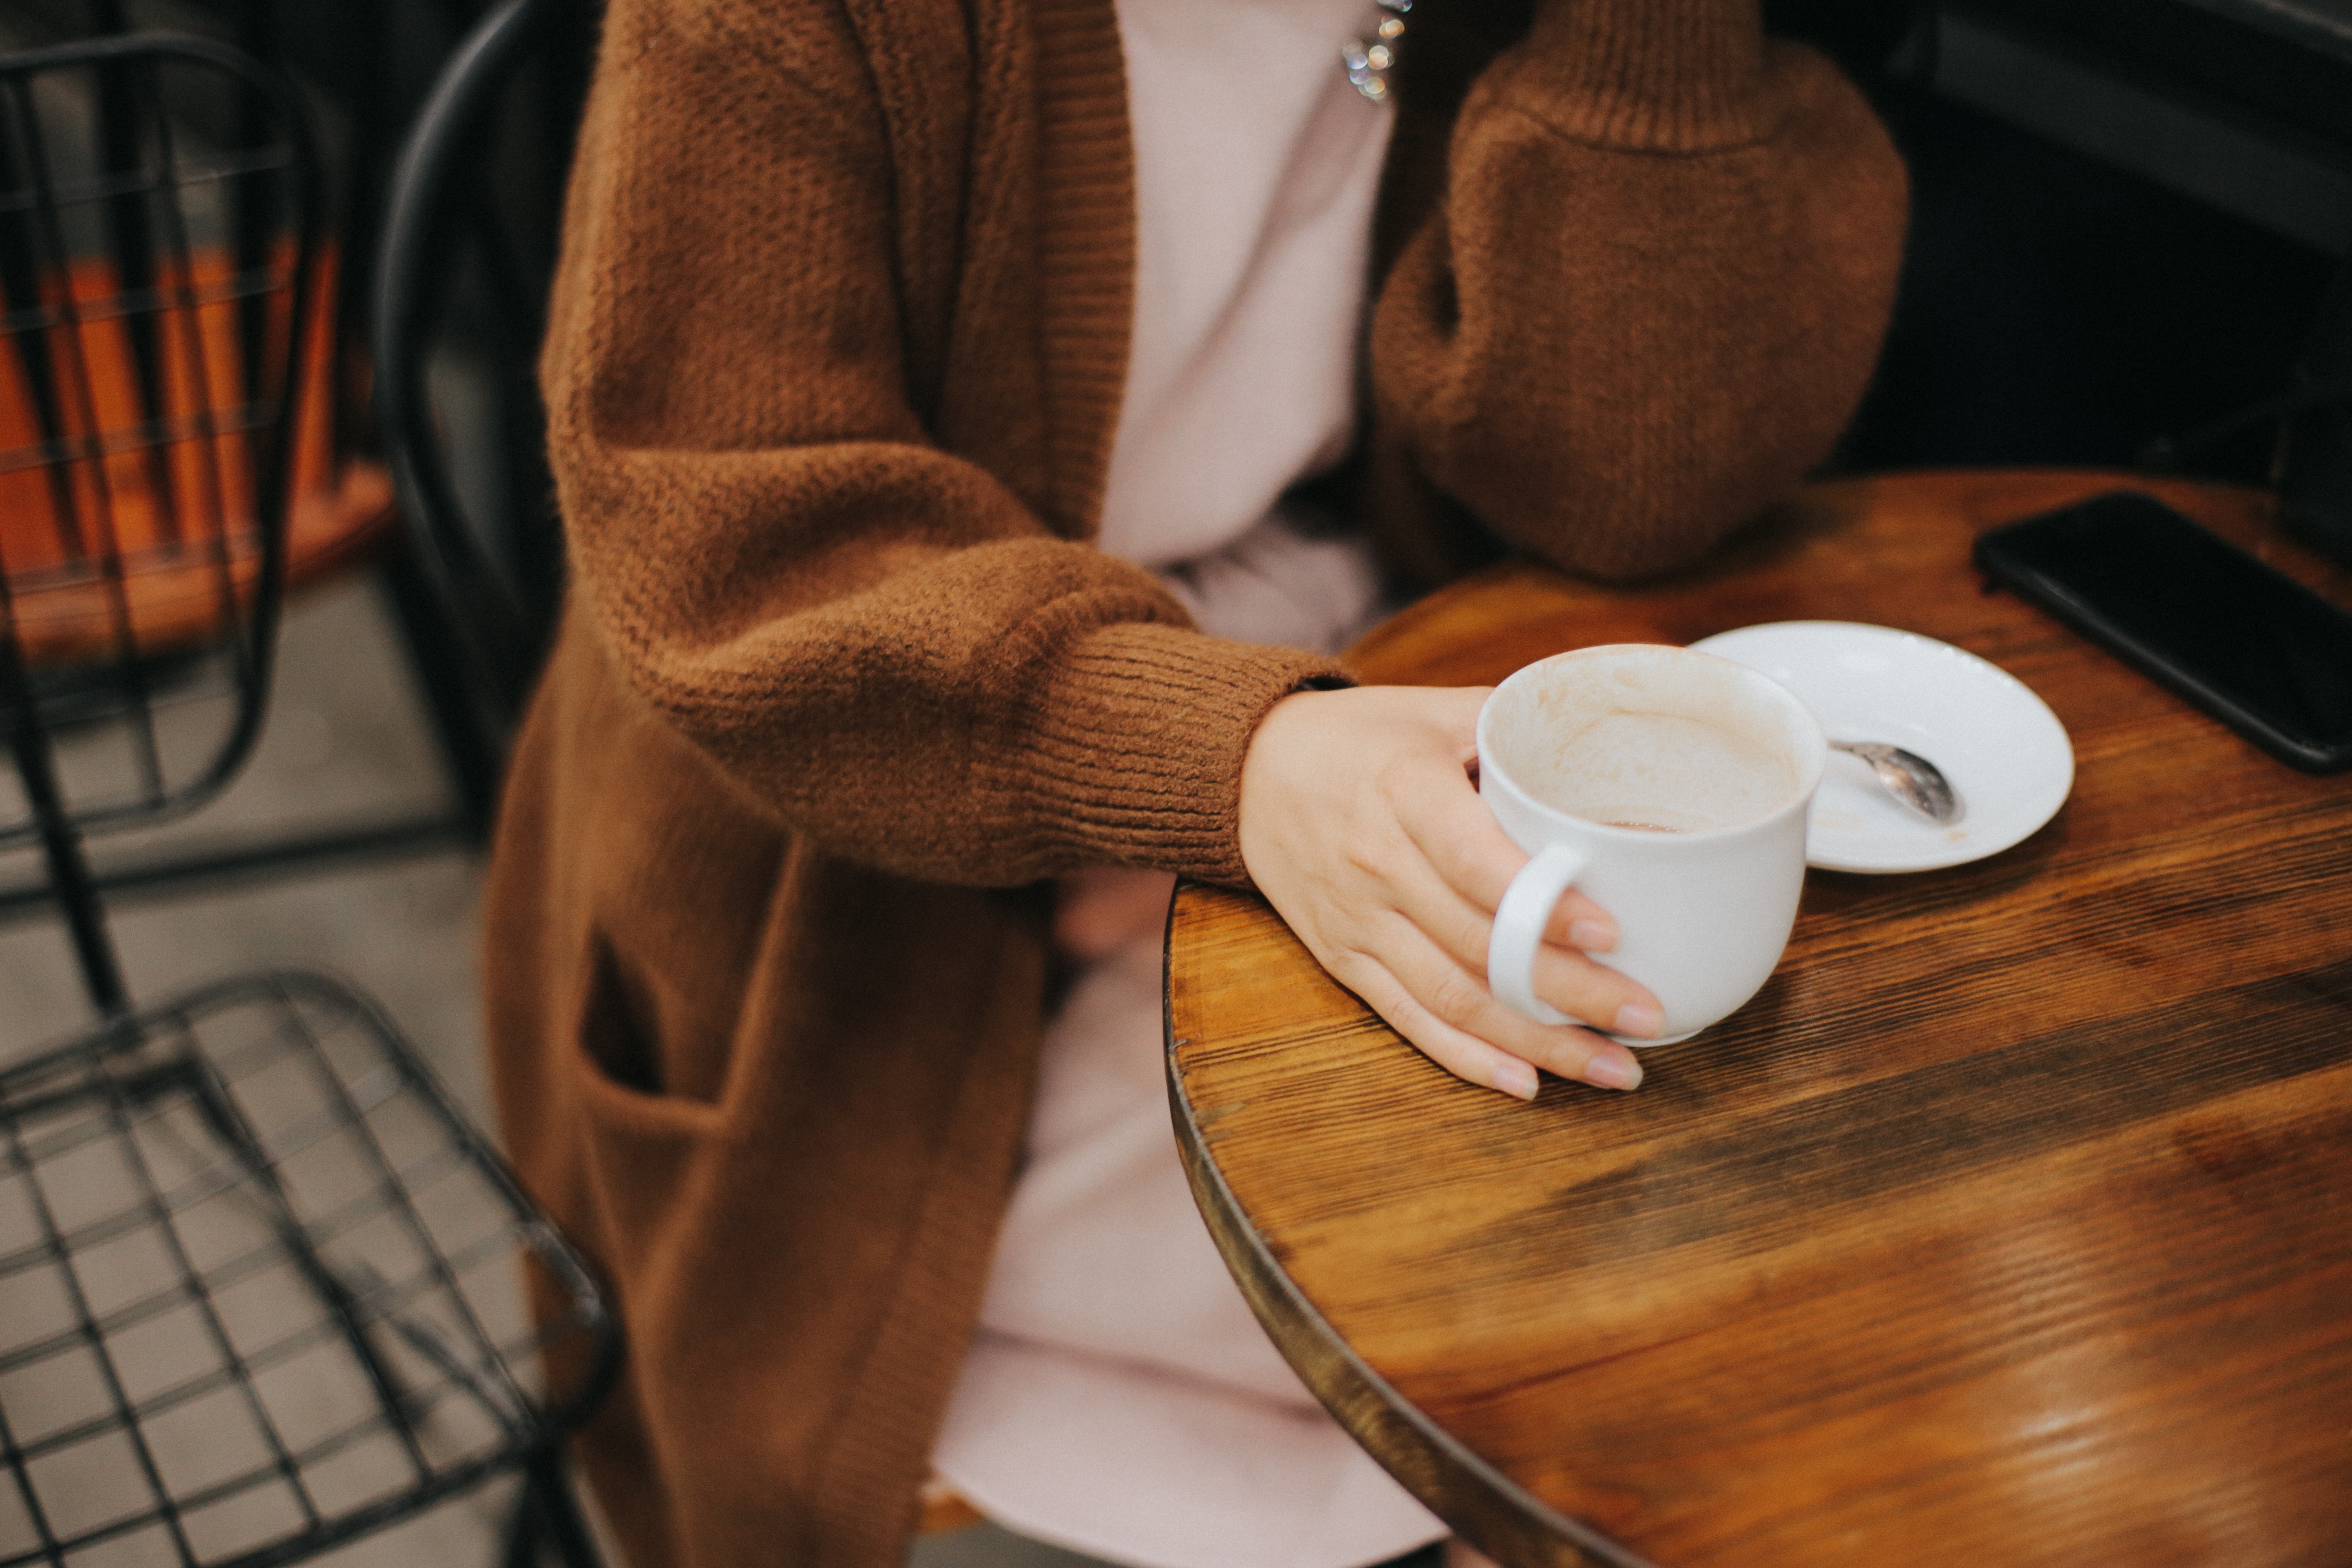 5472x3648 sad, wooden, cup, coffee, table, carlzeiss, girl, Free picture, hand, drink, cafe, coffee shop, relax, coffe, holding